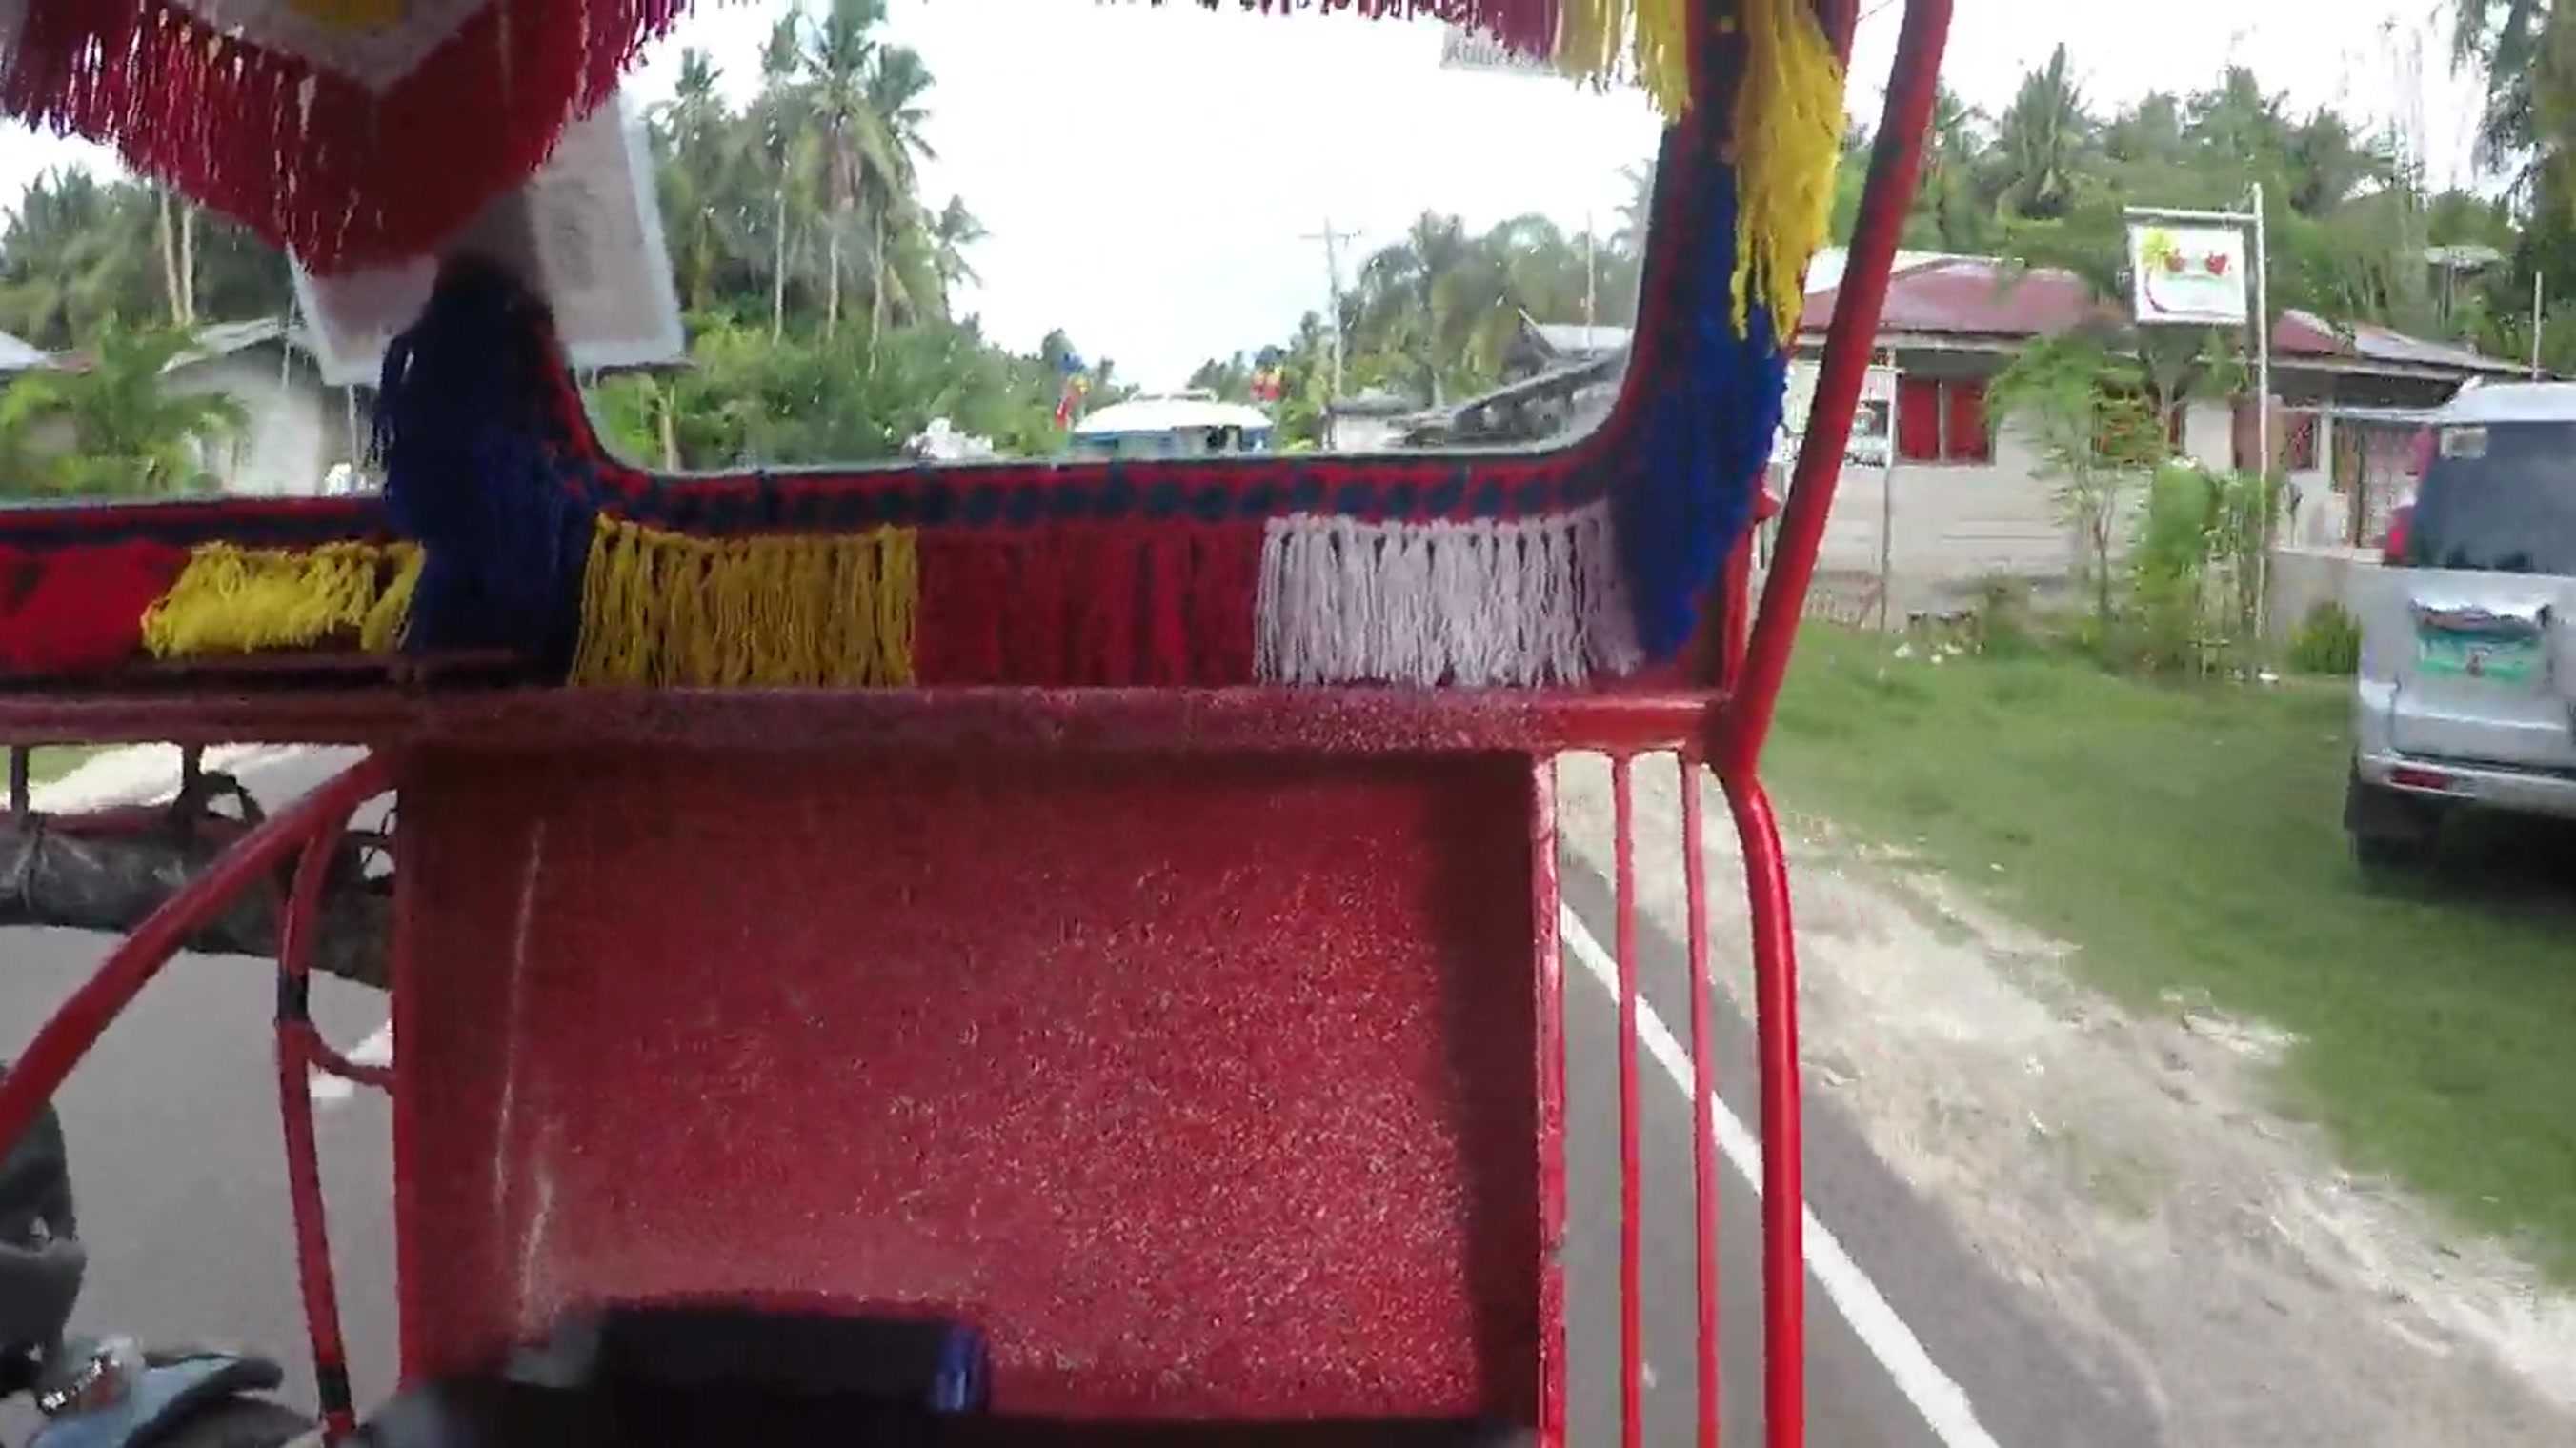 Windy tricycle ride, Siquijor, Cebu, the Philippines